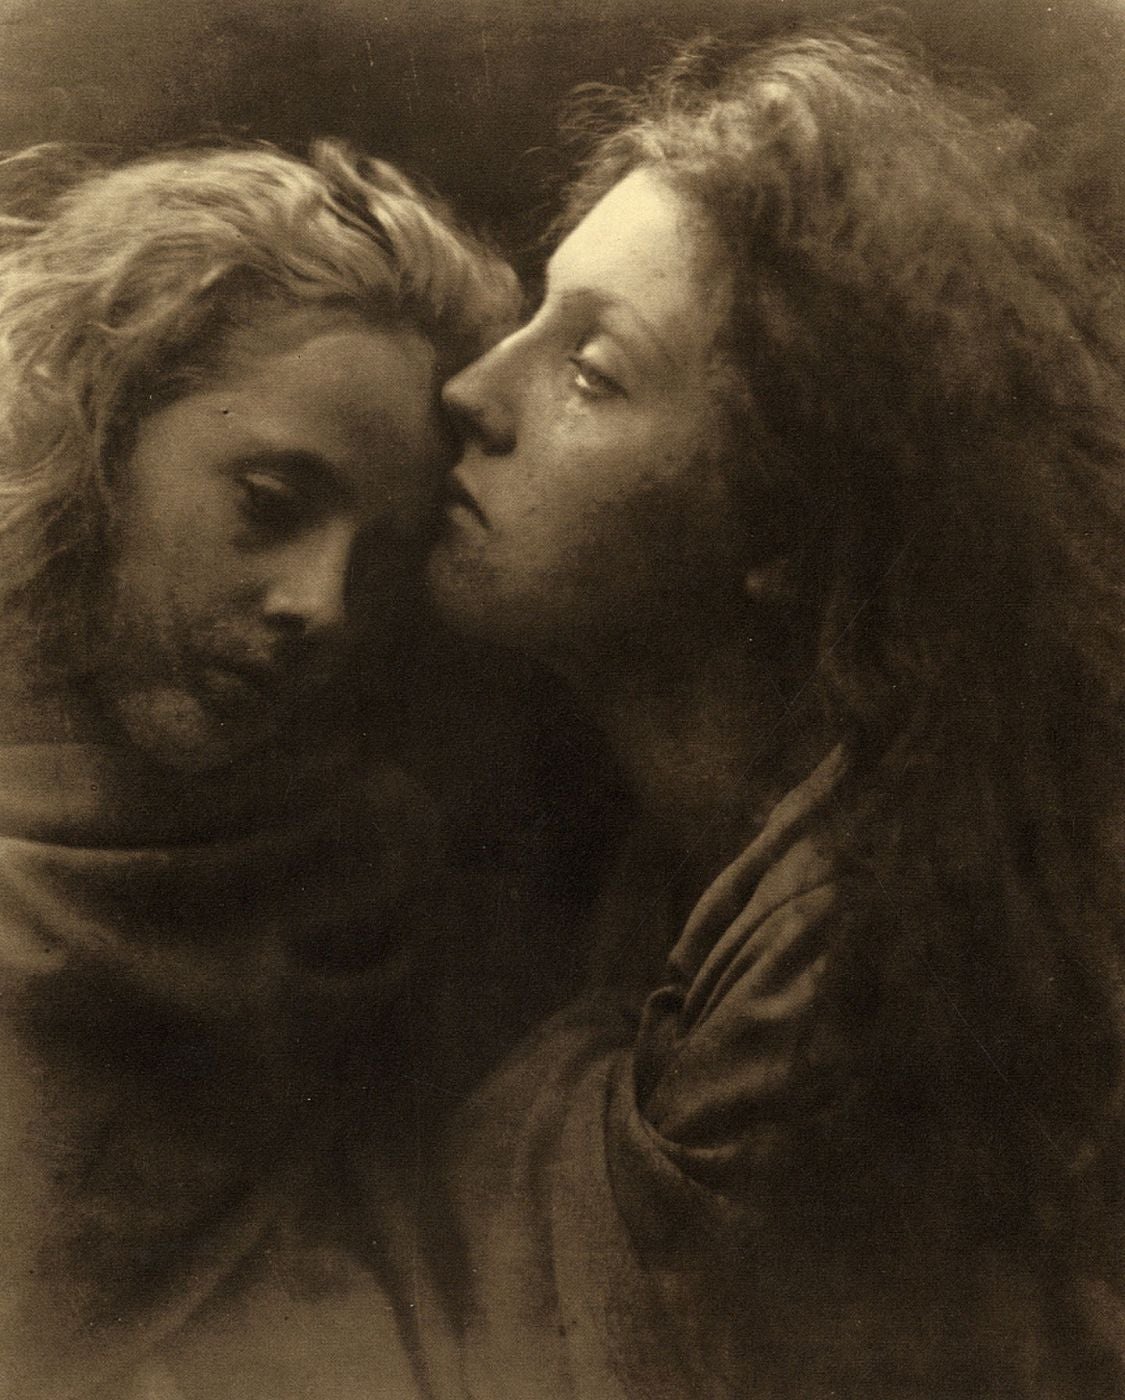 Whisper of the Muse: The Overstone Album & Other Photographs by Julia Margaret Cameron